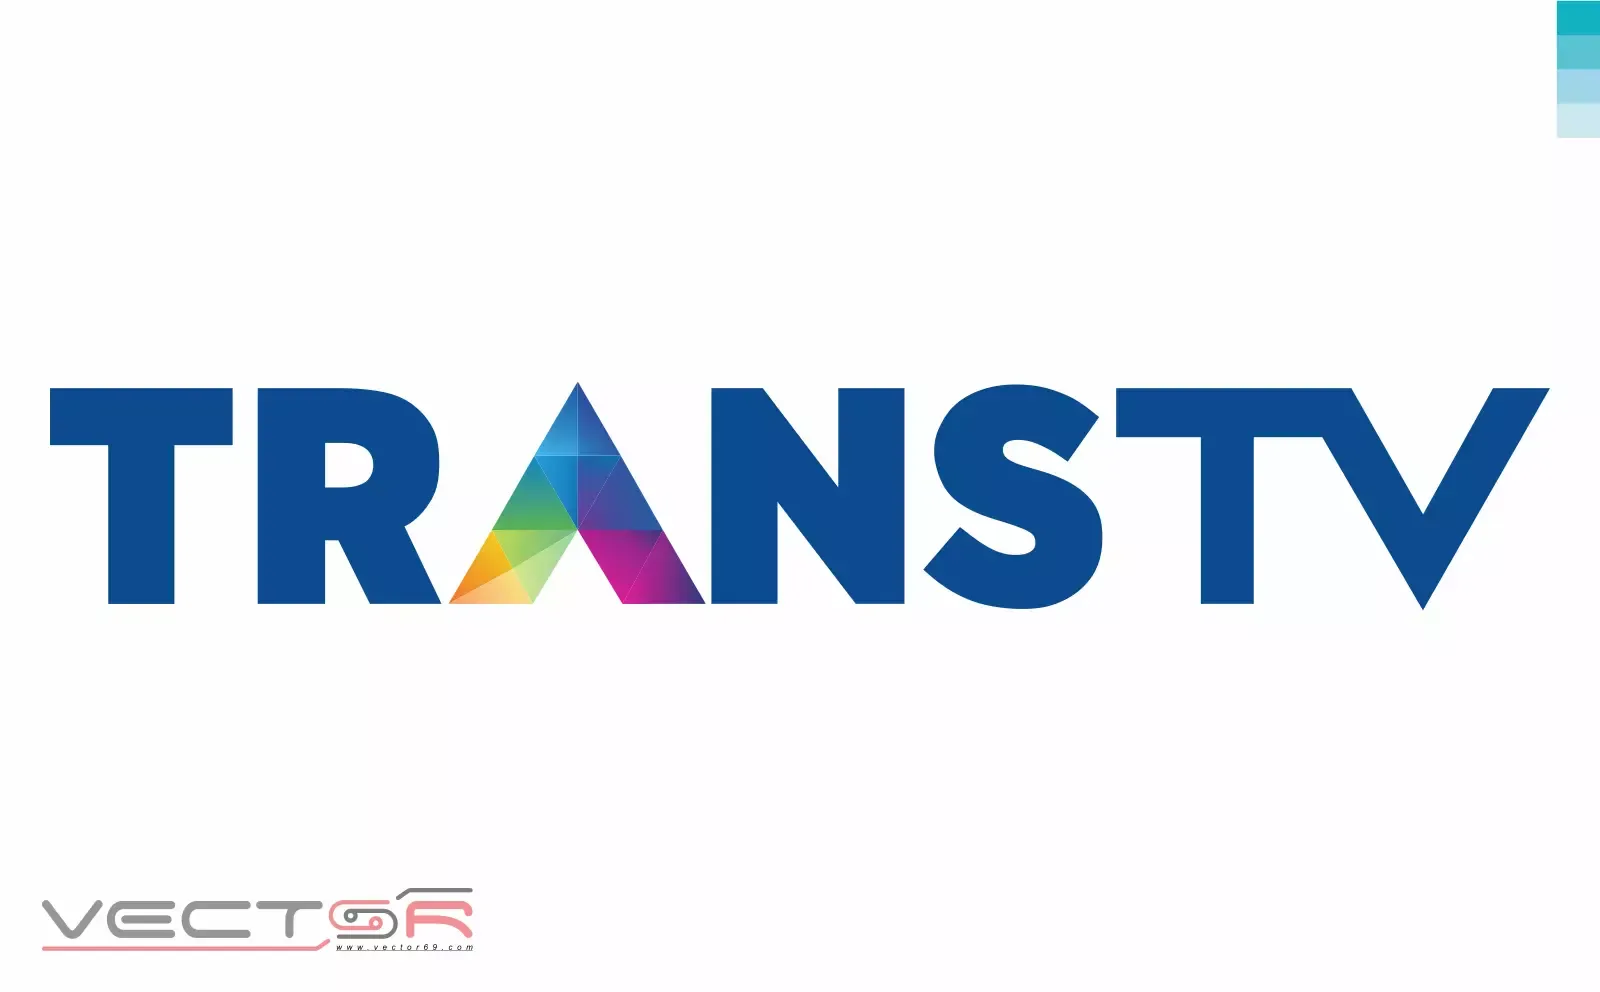 Trans TV (2013) Logo - Download Vector File SVG (Scalable Vector Graphics)